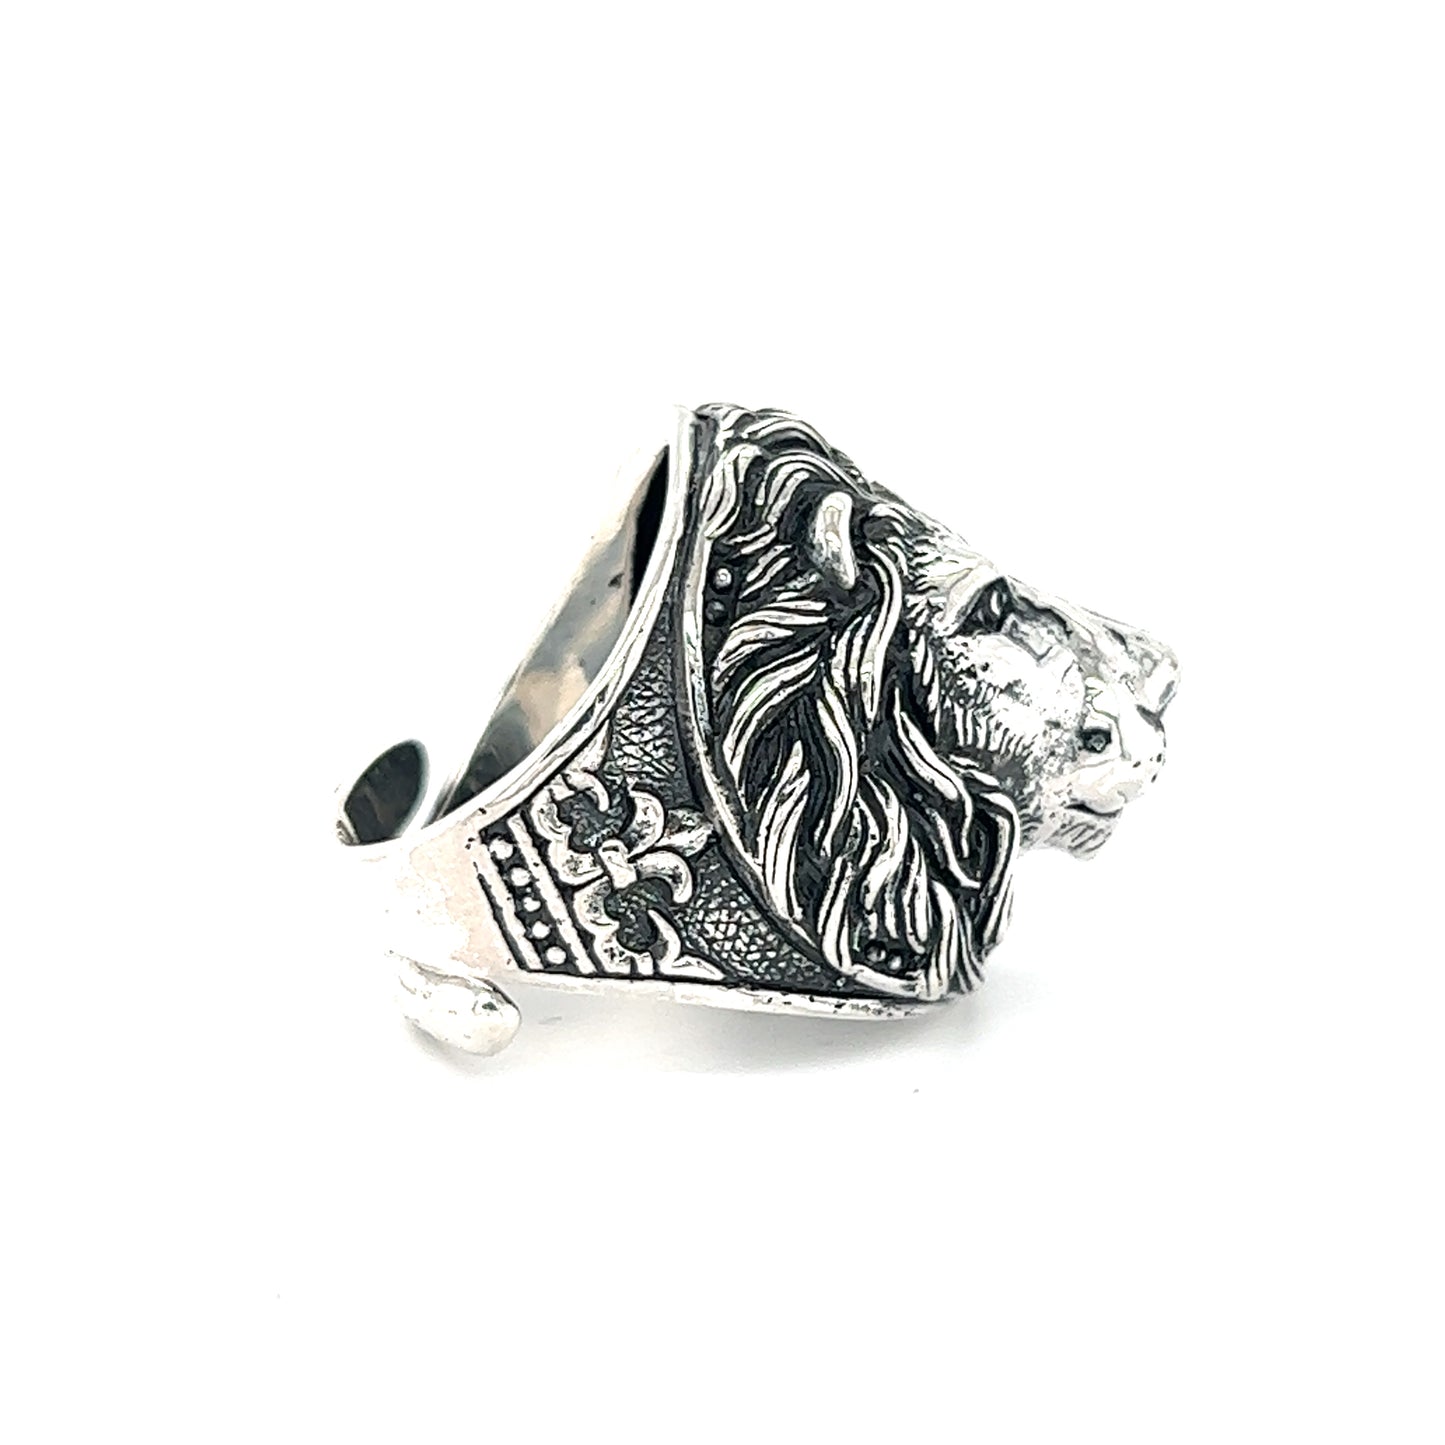 This sterling silver Lion Head Ring with Fleur-de-lis features a majestic lion head.